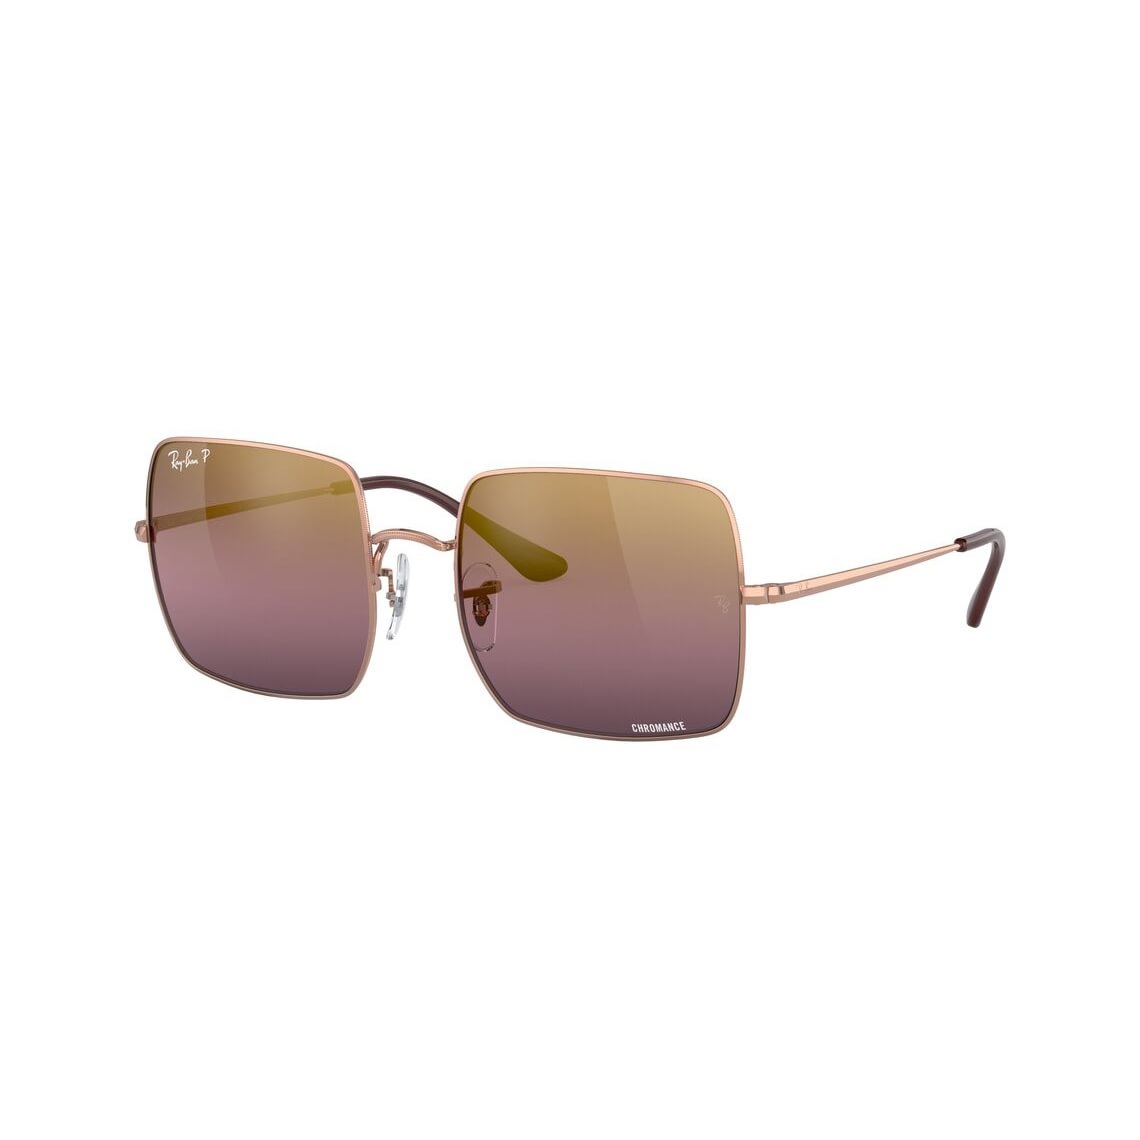 Ray-Ban Square RB1971 9202G9 5419